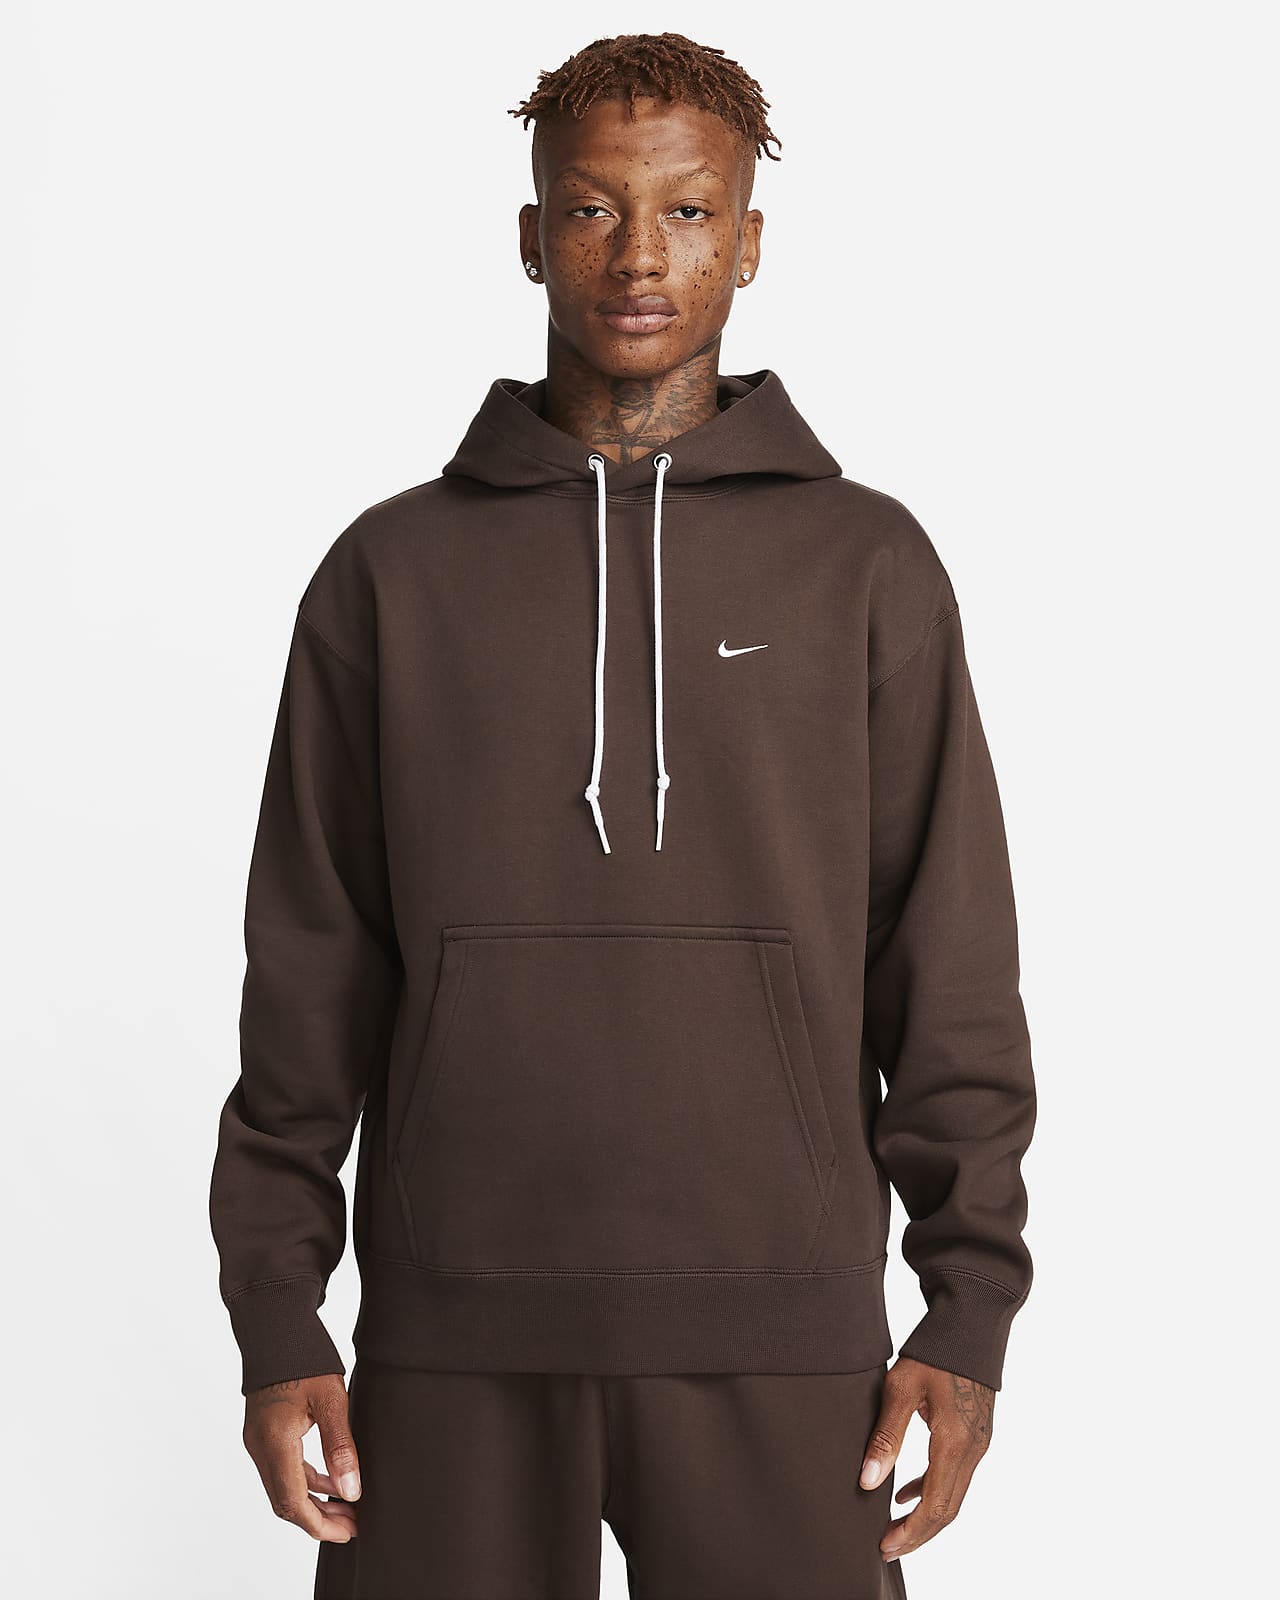 Sweat à capuche et zip Nike « Made in the USA » pour Homme. Nike FR